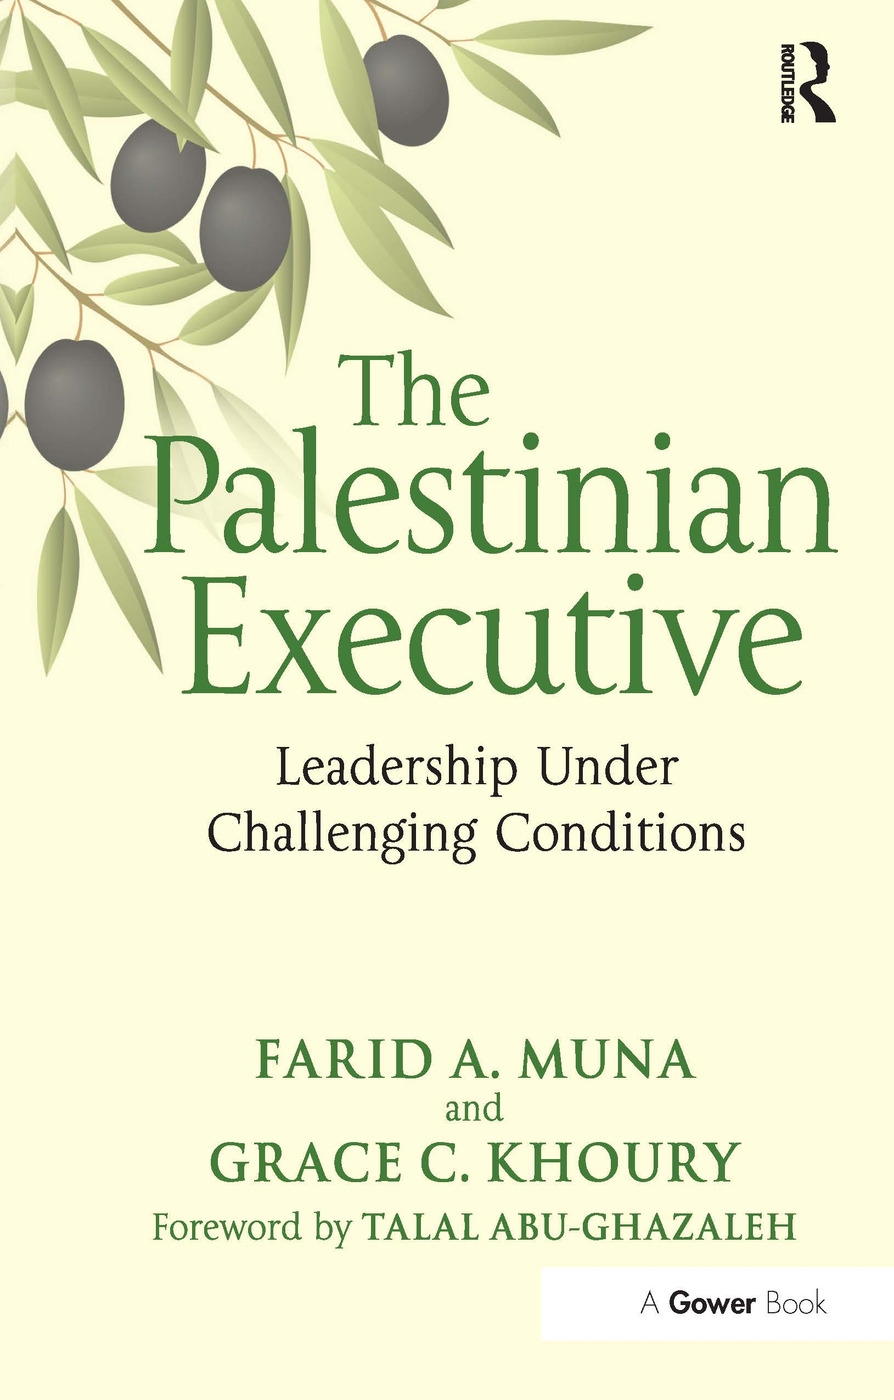 The Palestinian Executive: Leadership Under Challenging Conditions